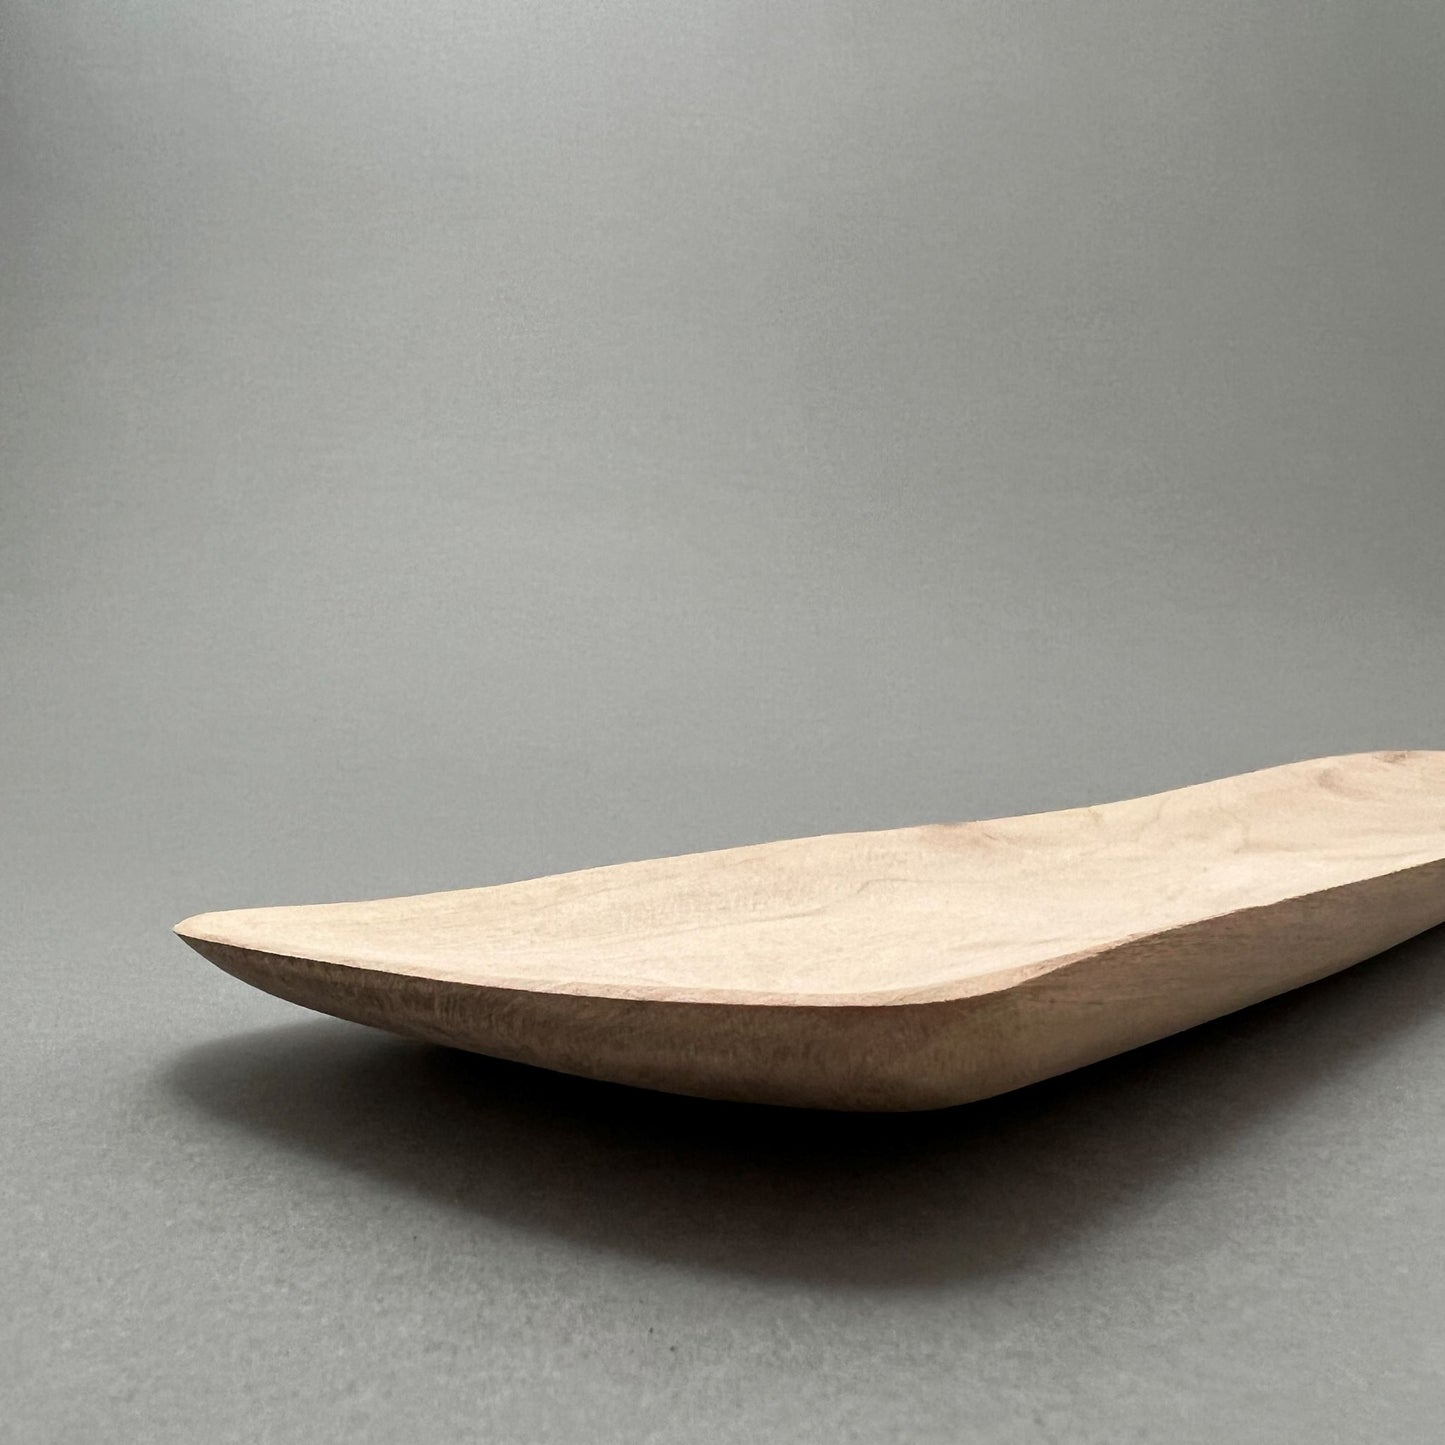 An oblong wooden tray laying on a gray background